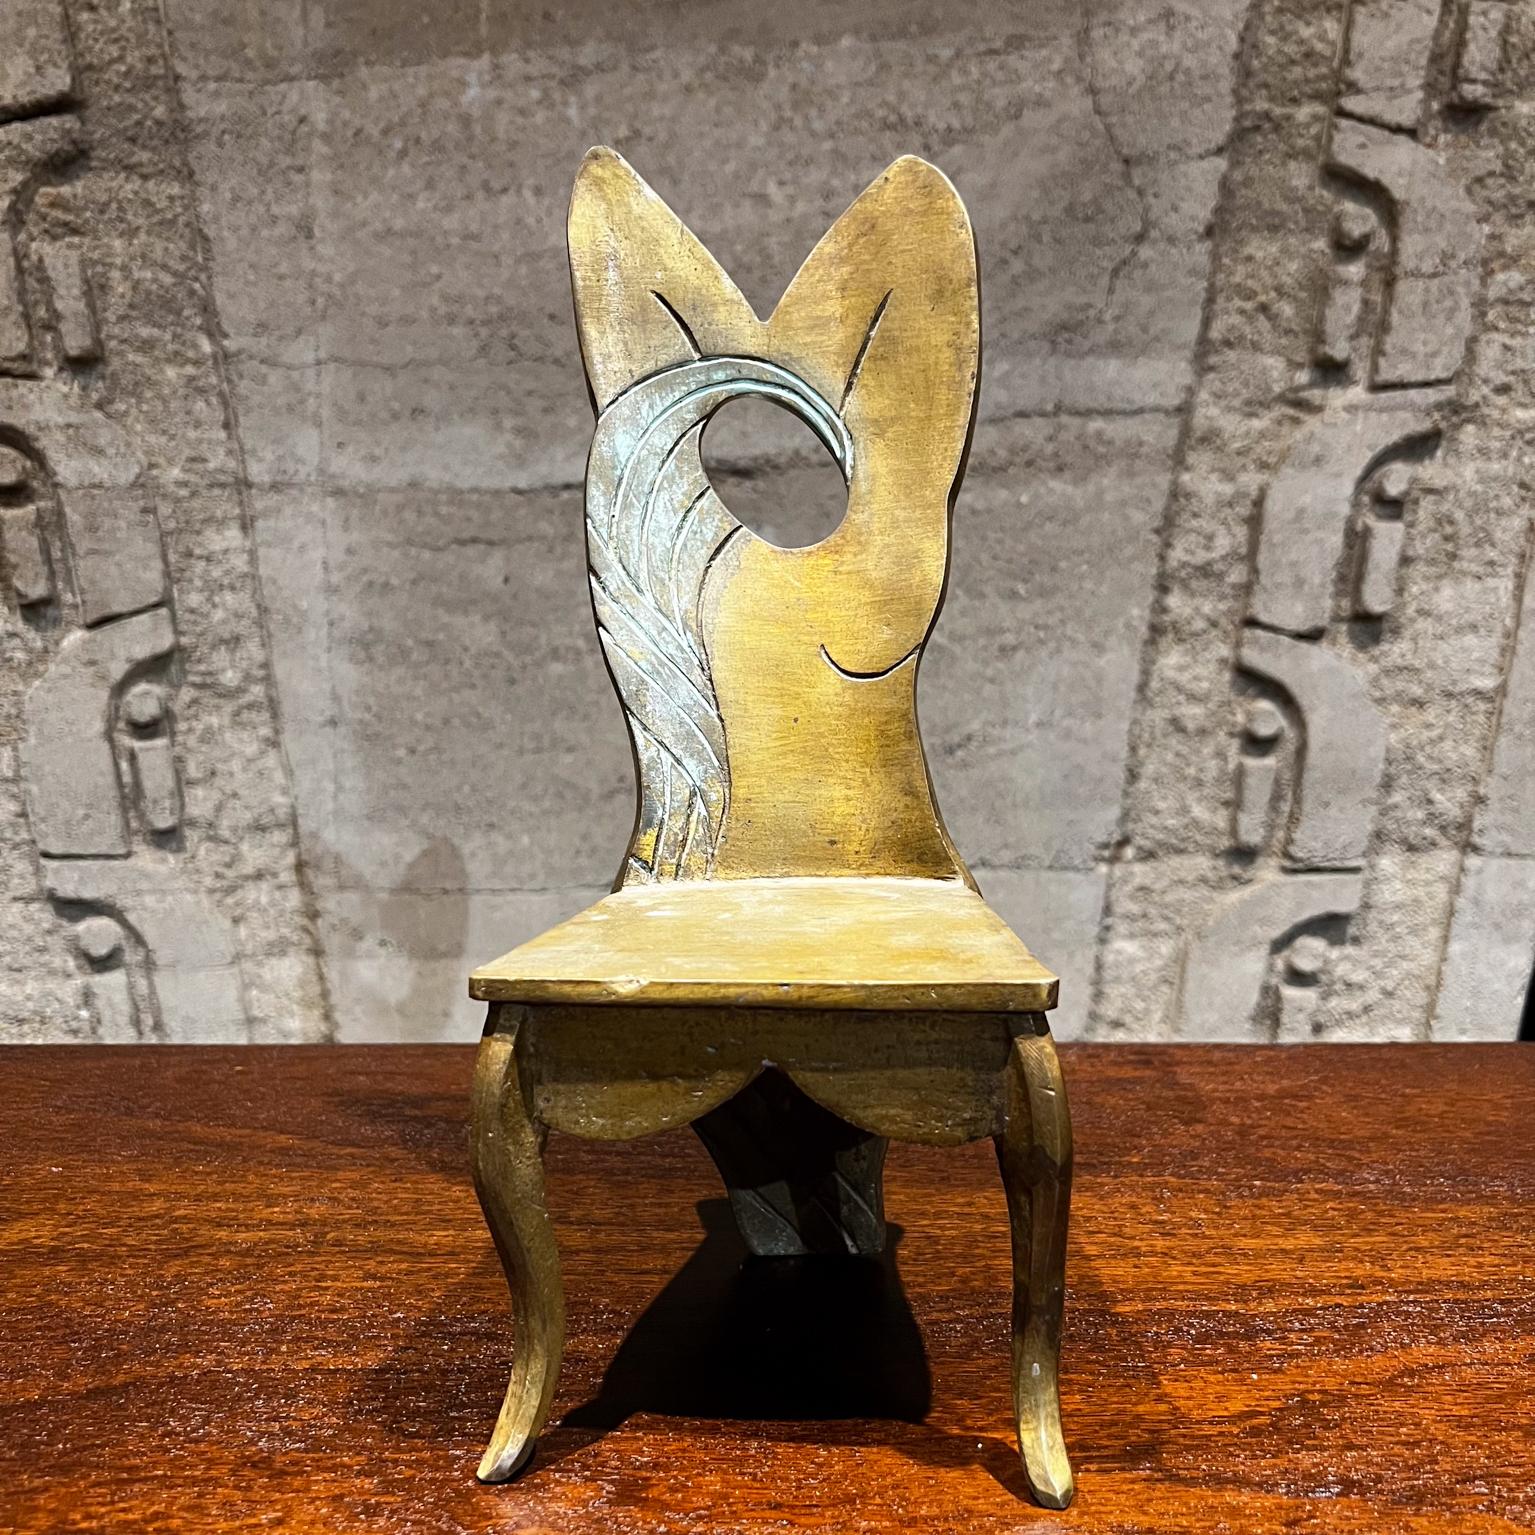 1970s Bronze Chair Sculpture Modern Surrealism Mexico
Unmarked, after Pedro Friedeberg.
12.5 tall x 5 w x 5.5 d
Original vintage condition.
Refer to all images.